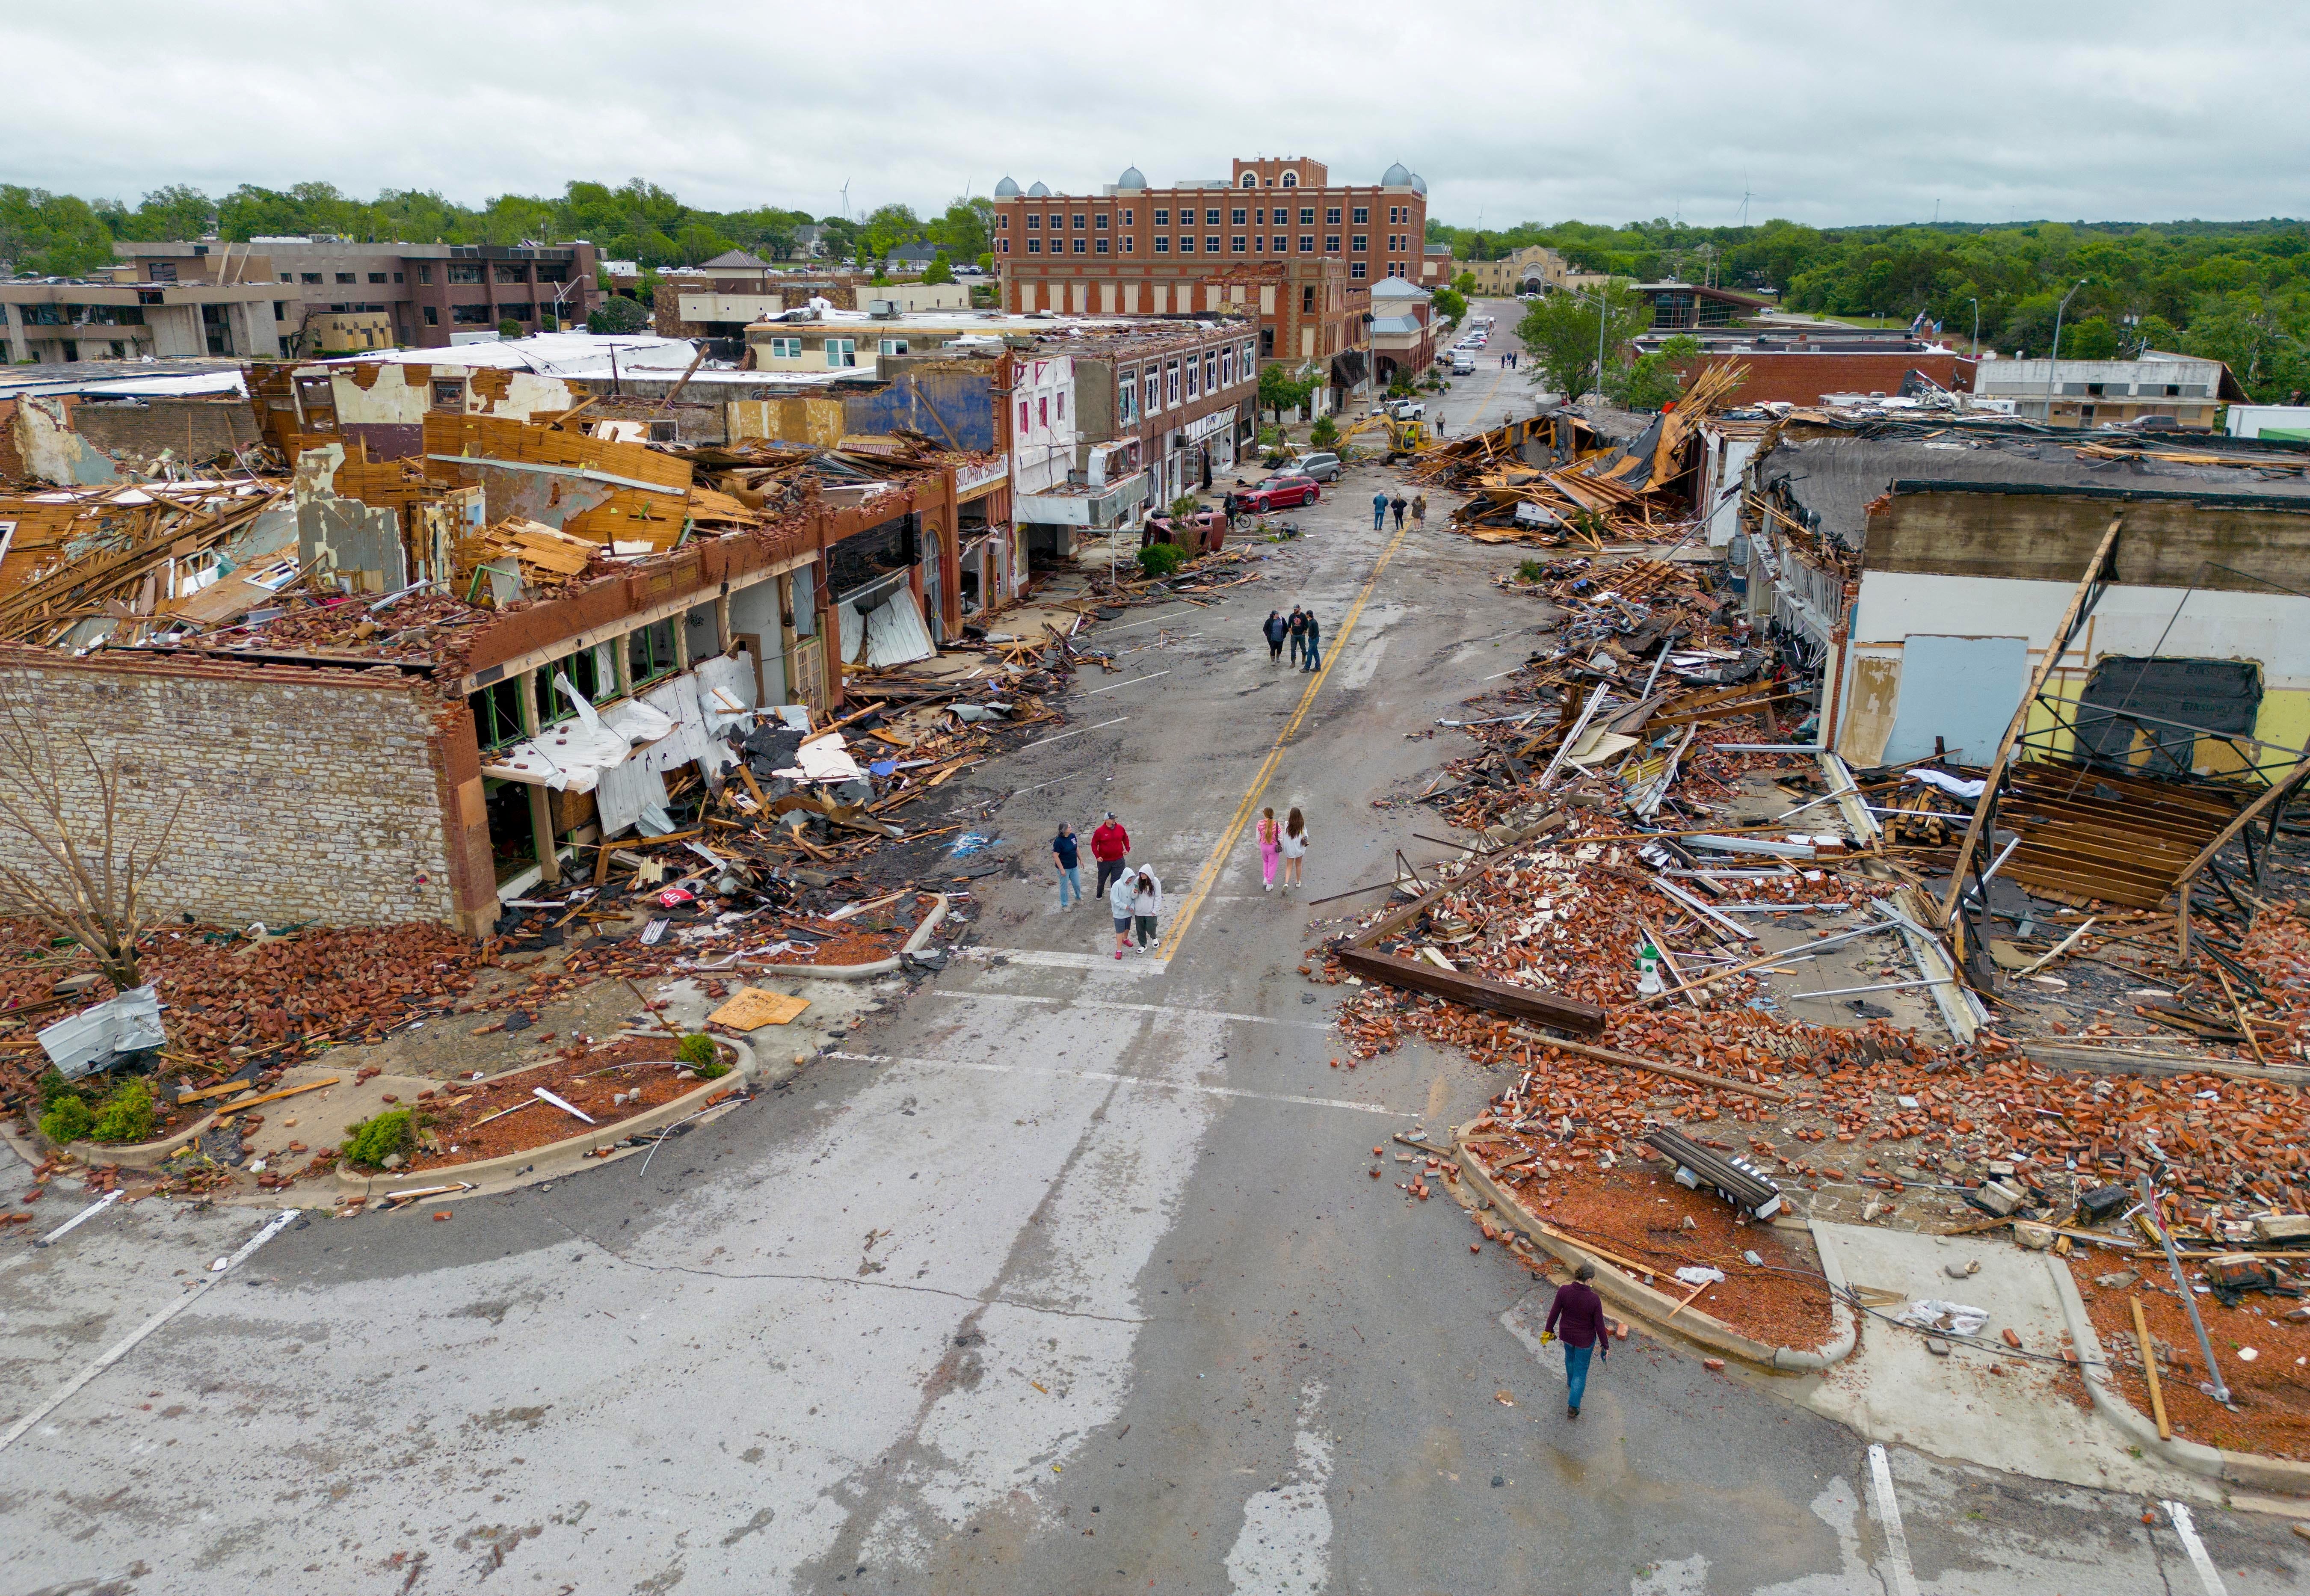 Damaged building in downtown Sulphur pictured on Sunday. Oklahoma Governor Kevin Stitt said the storms destroyed nearly all downtown businesses